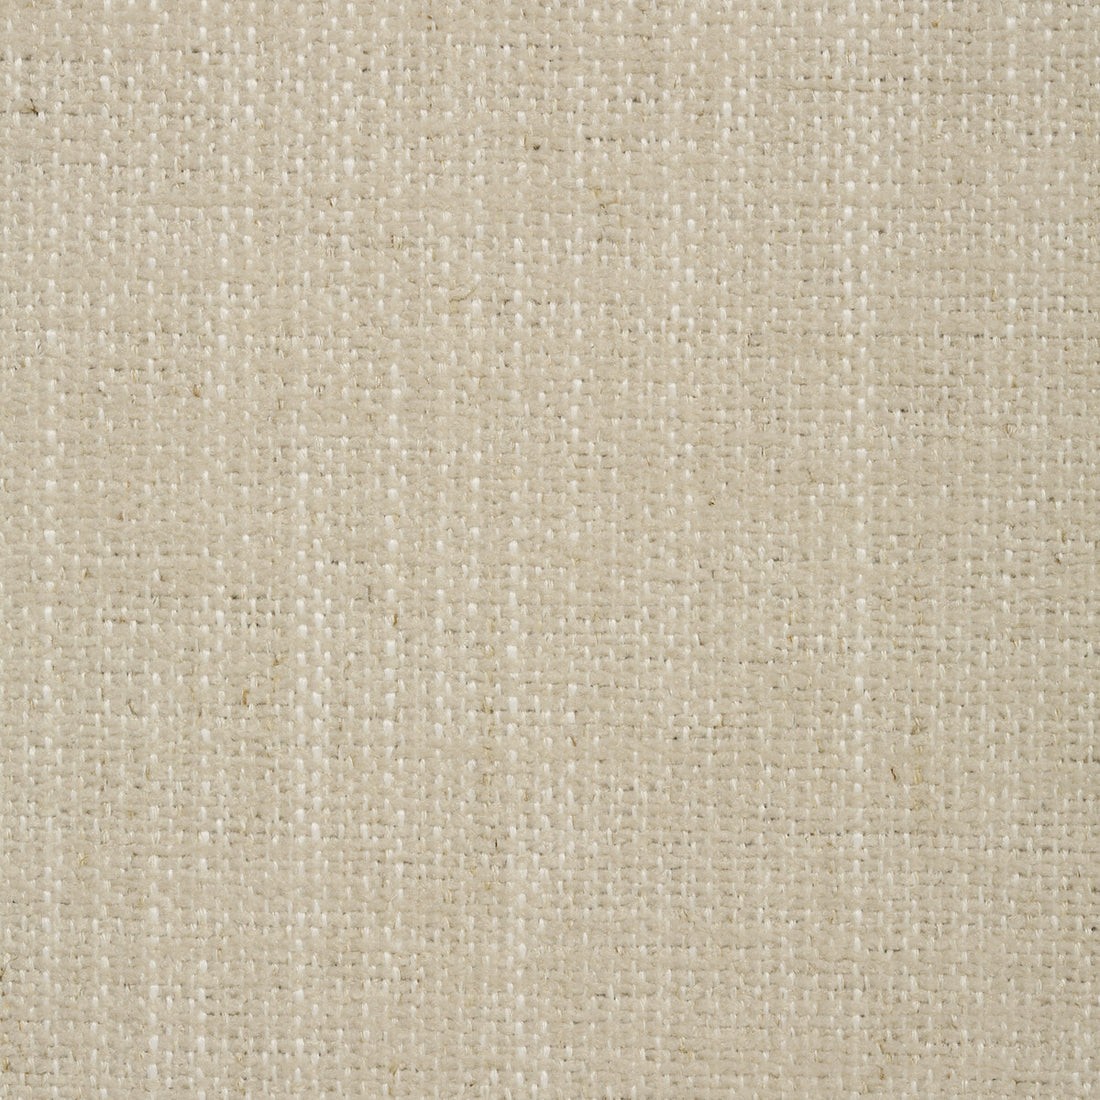 Kravet Smart fabric in 35111-1116 color - pattern 35111.1116.0 - by Kravet Smart in the Performance Crypton Home collection